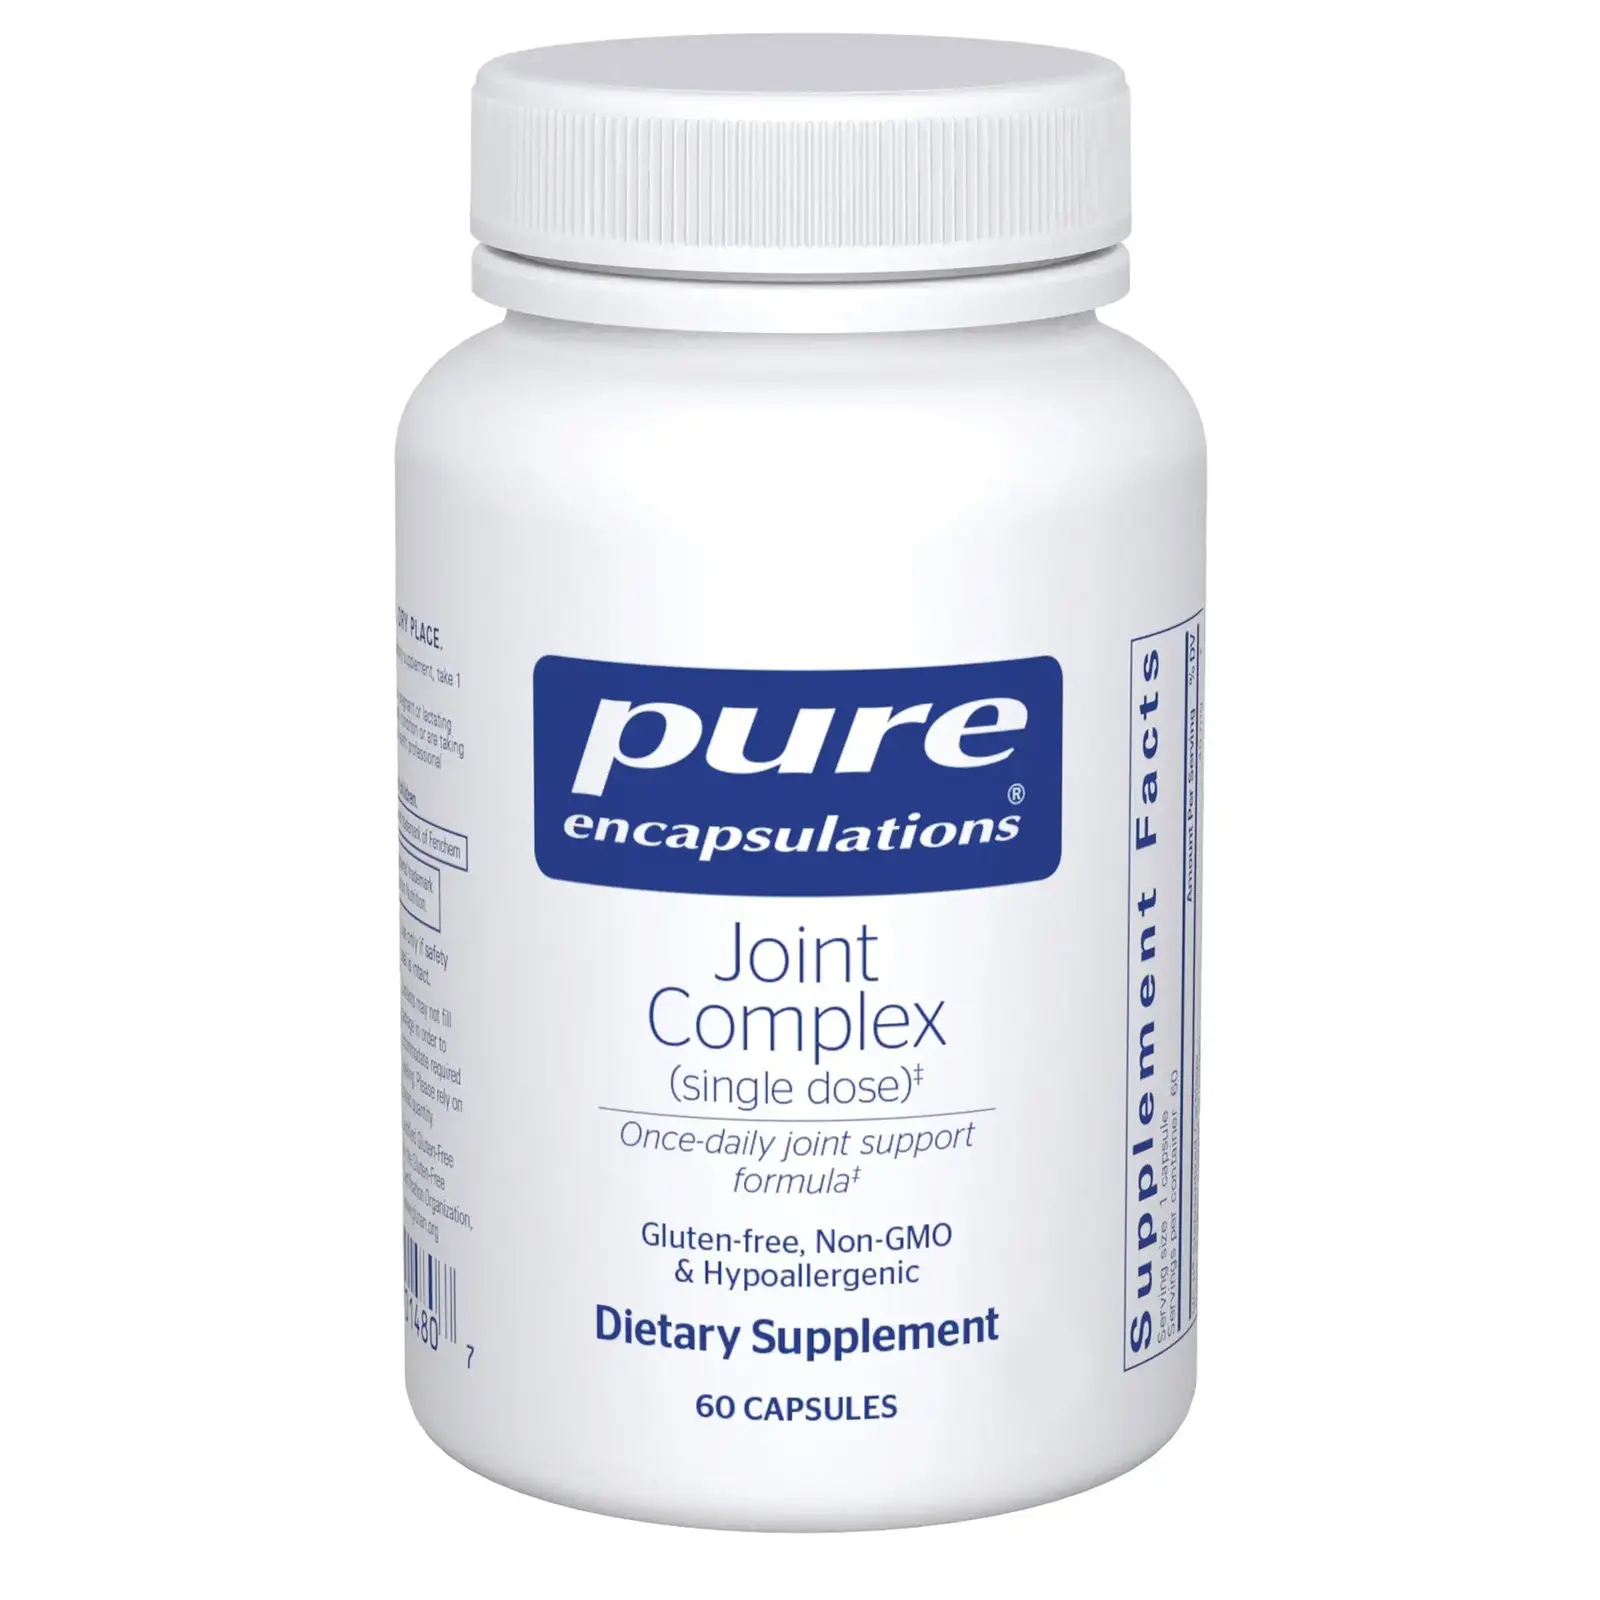 Joint Complex (single dose)‡